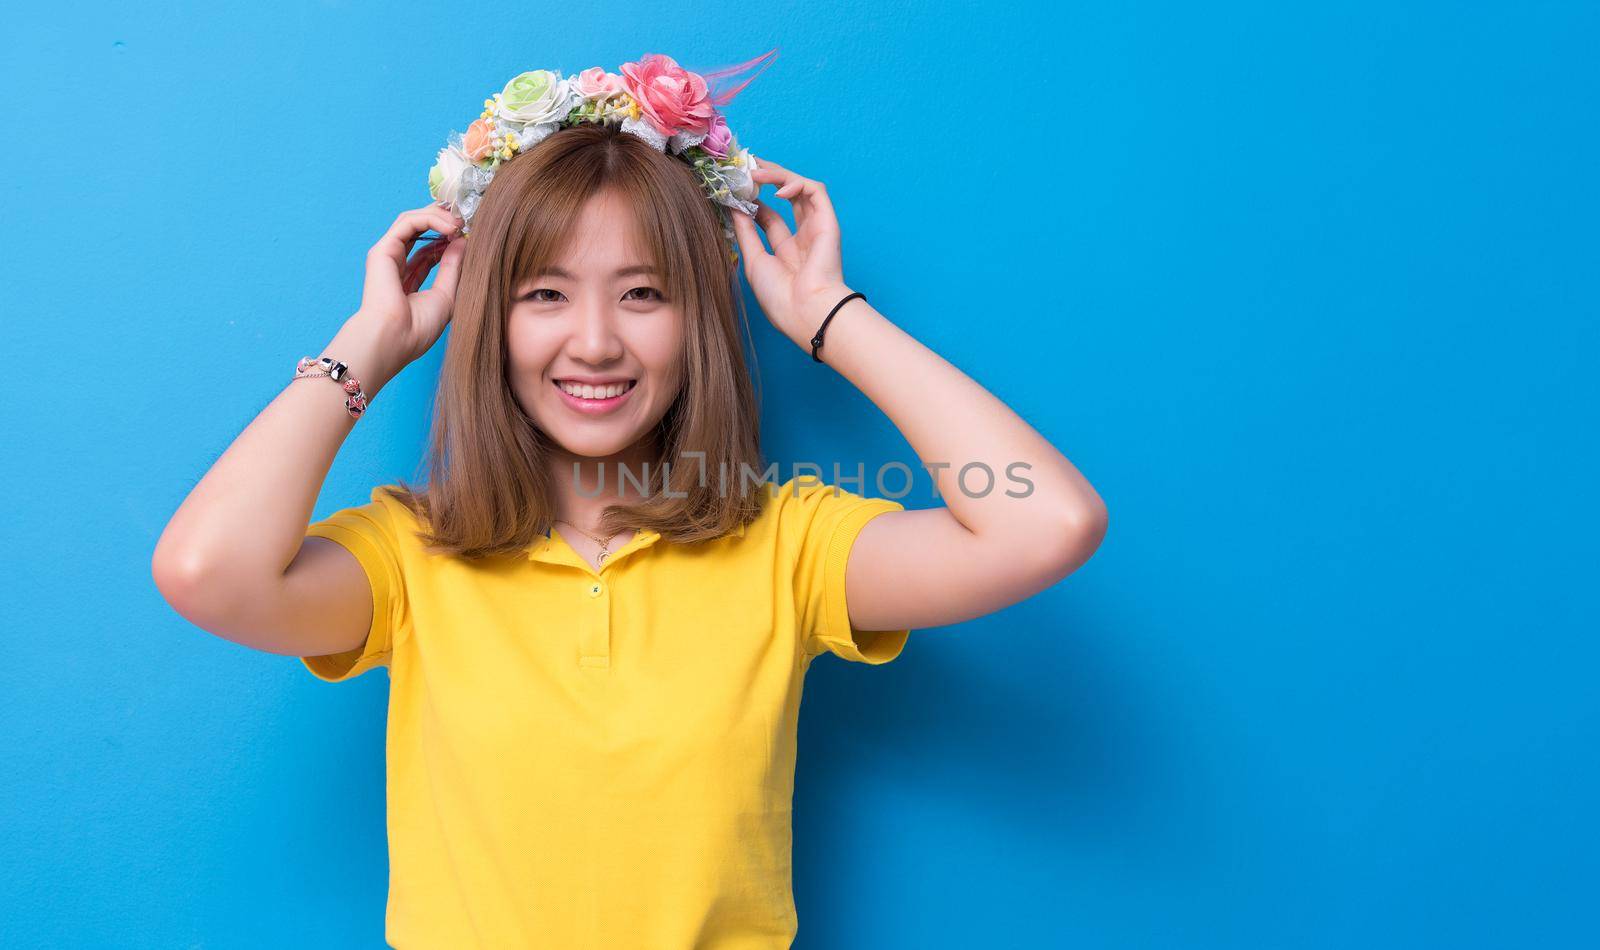 Beauty woman posing with flower hat in front of blue wall background. Summer and vintage concept. Happiness lifestyle and people portrait theme. Cute gesture and pastel tone.